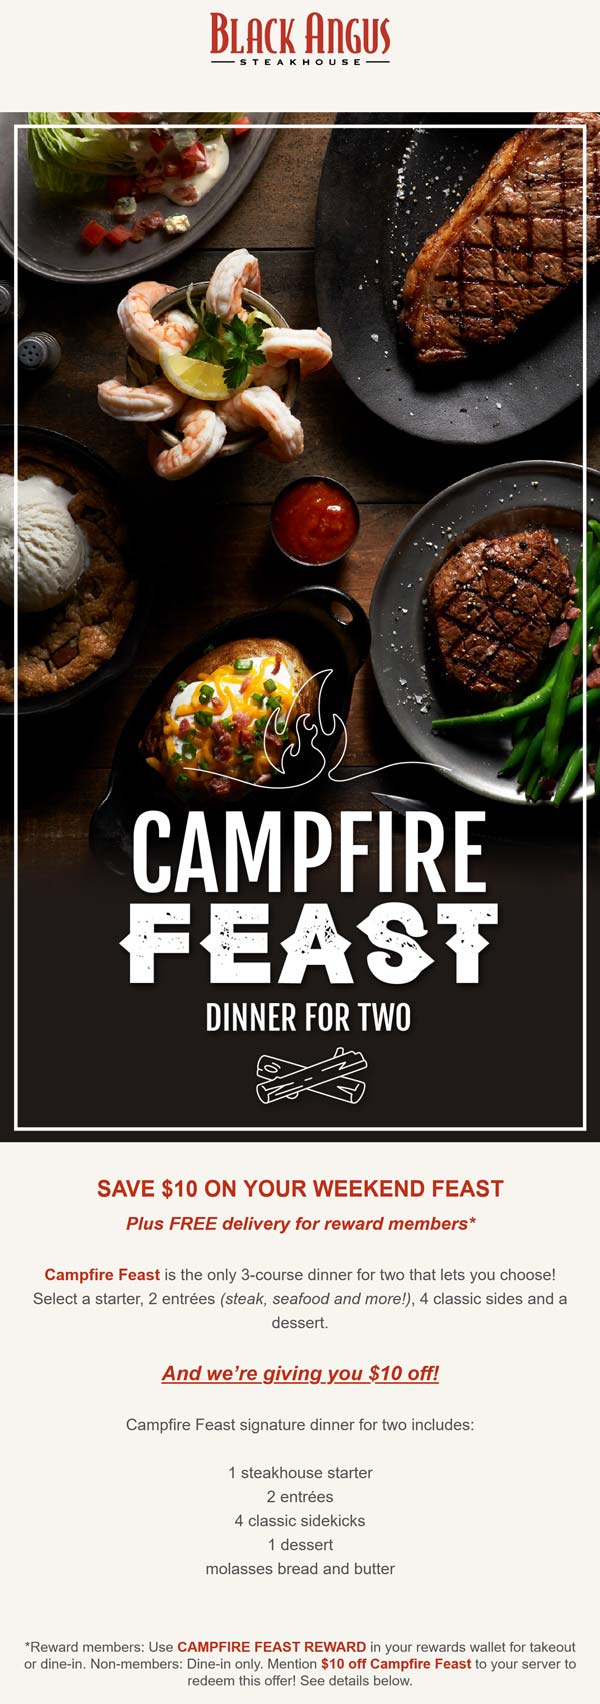 Black Angus restaurants Coupon  $10 off a campfire feast dinner for 2 at Black Angus #blackangus 